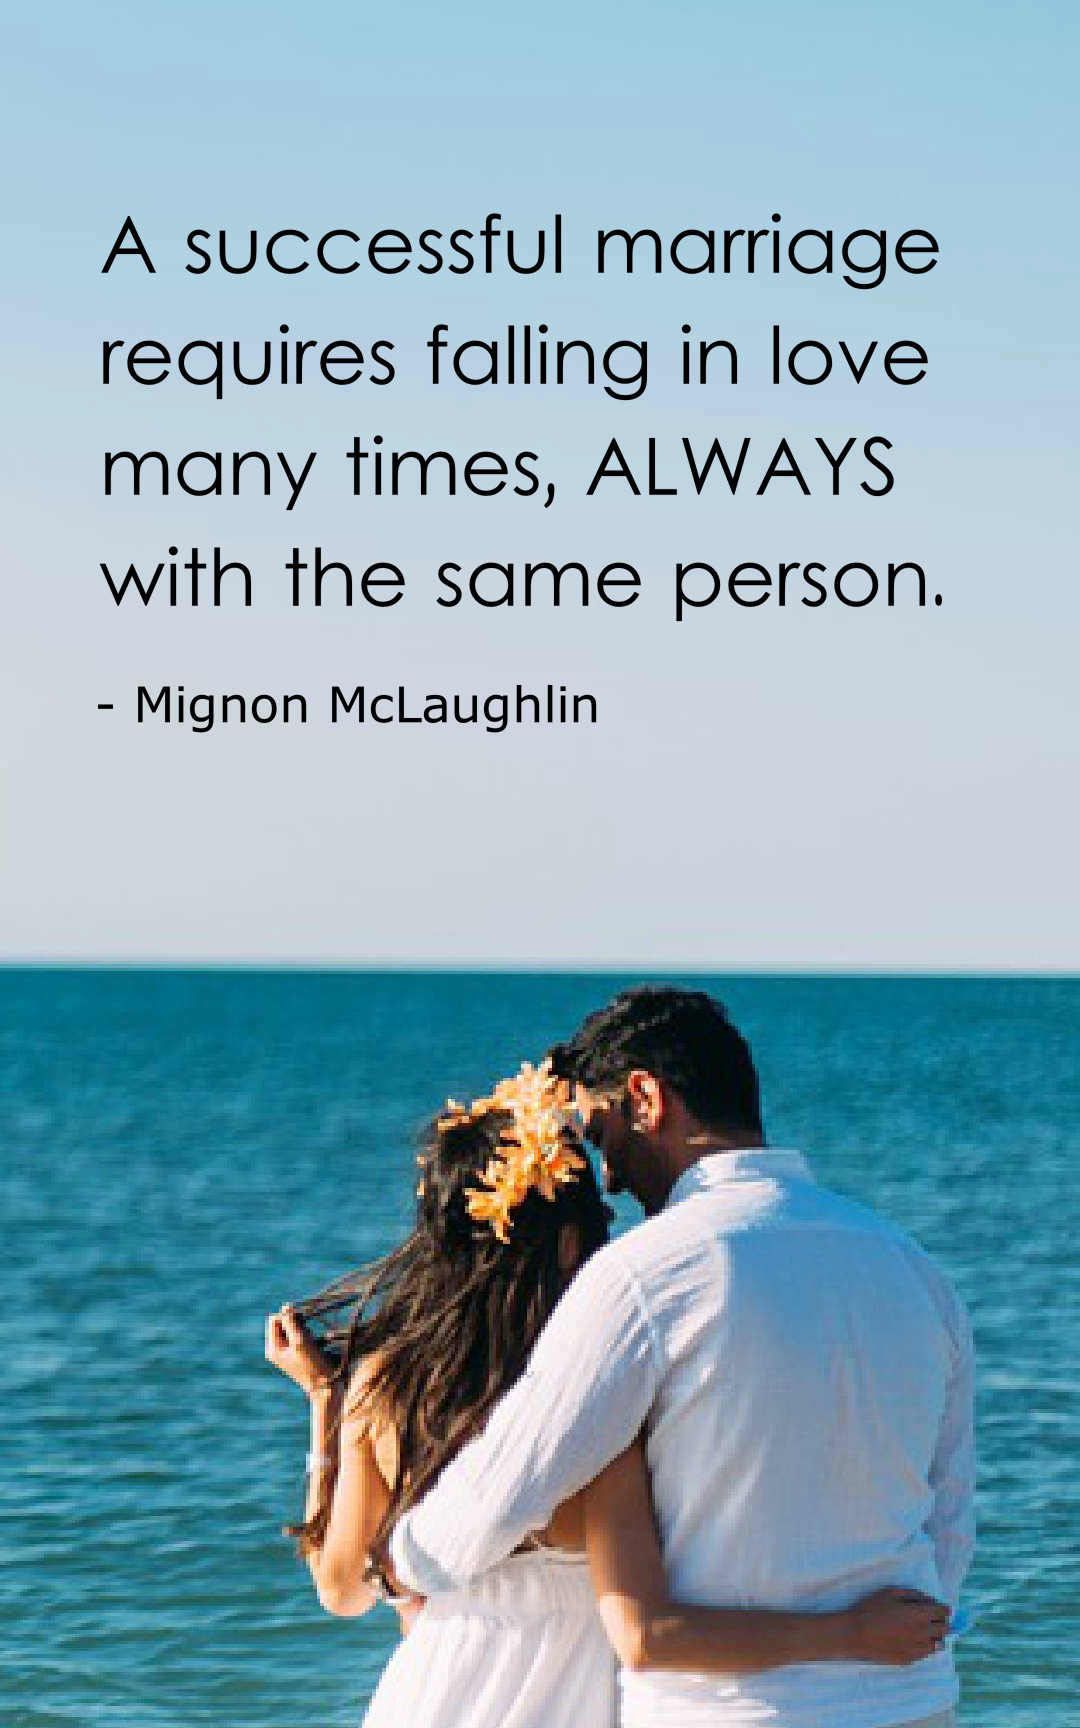 Marriage Motivational Quotes
 45 Inspirational Marriage Quotes And Sayings With